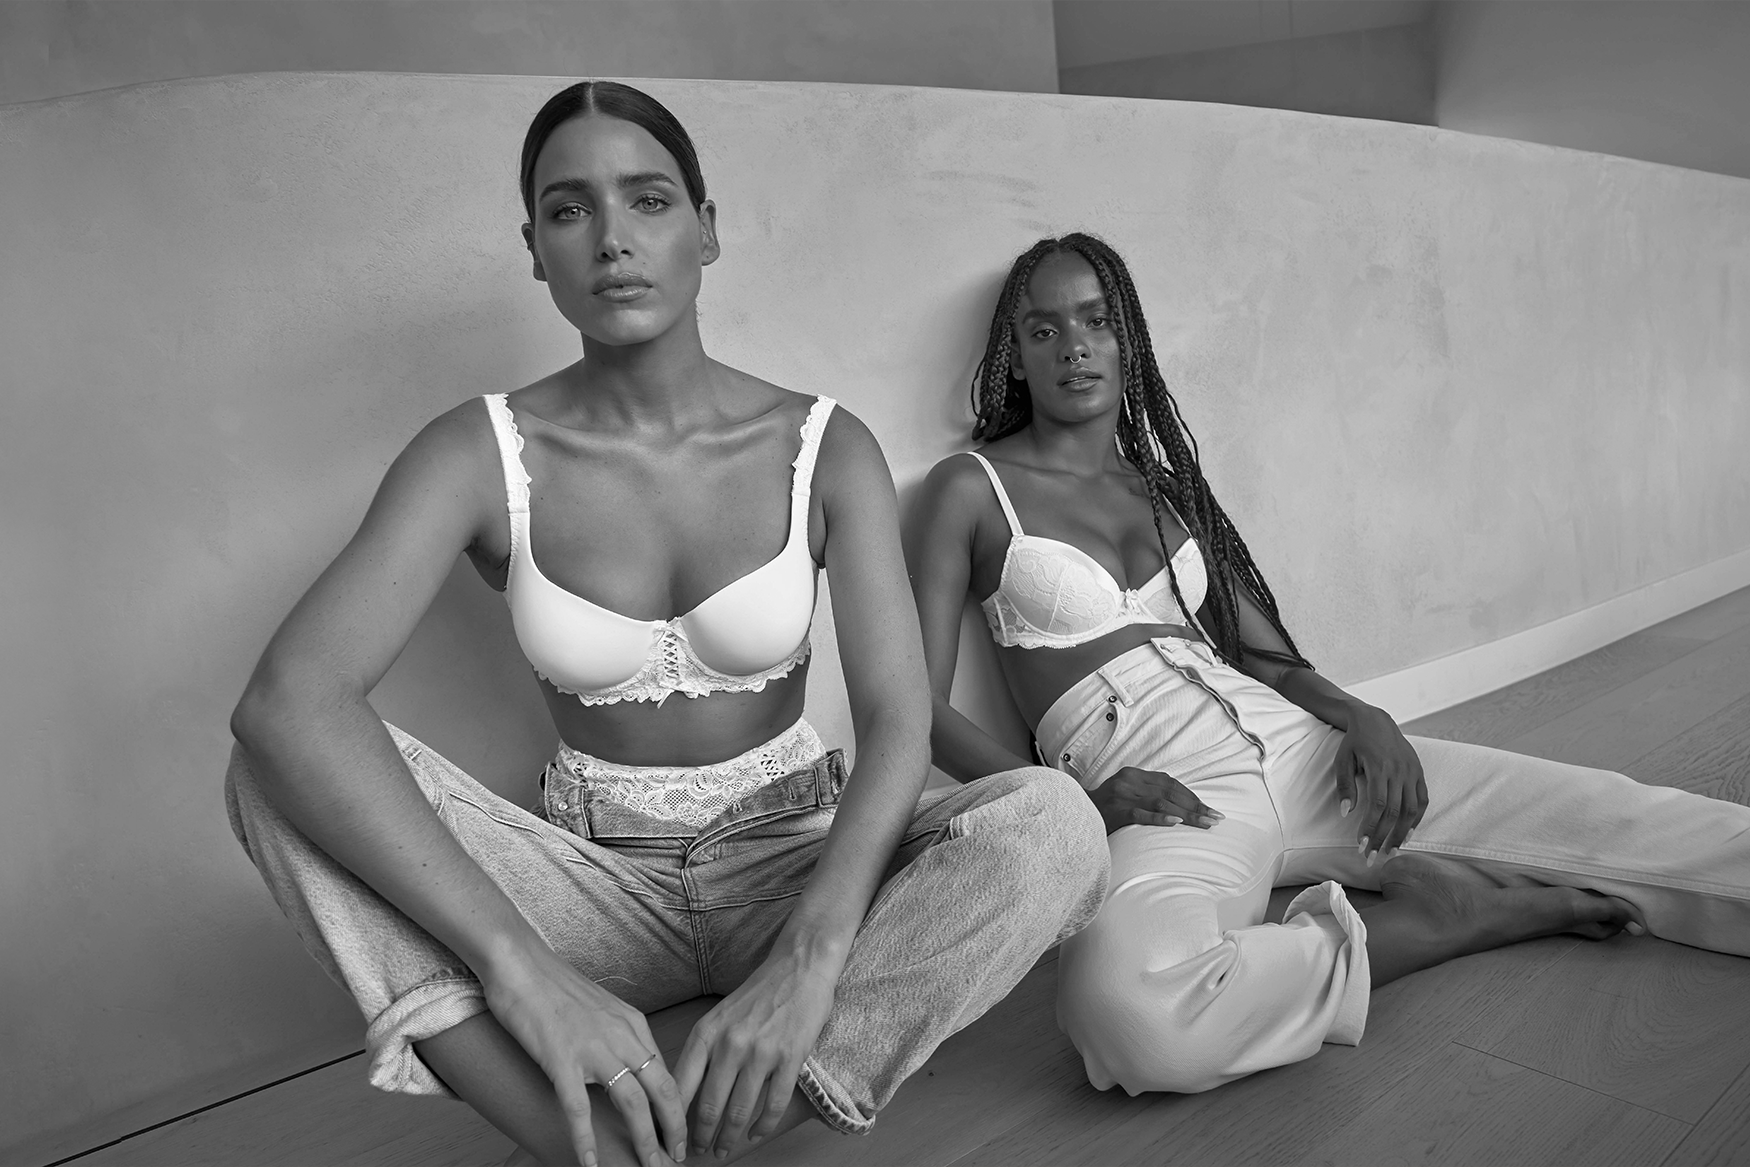 Two women sitting slouching; wearing white lace lingerie and jeans.